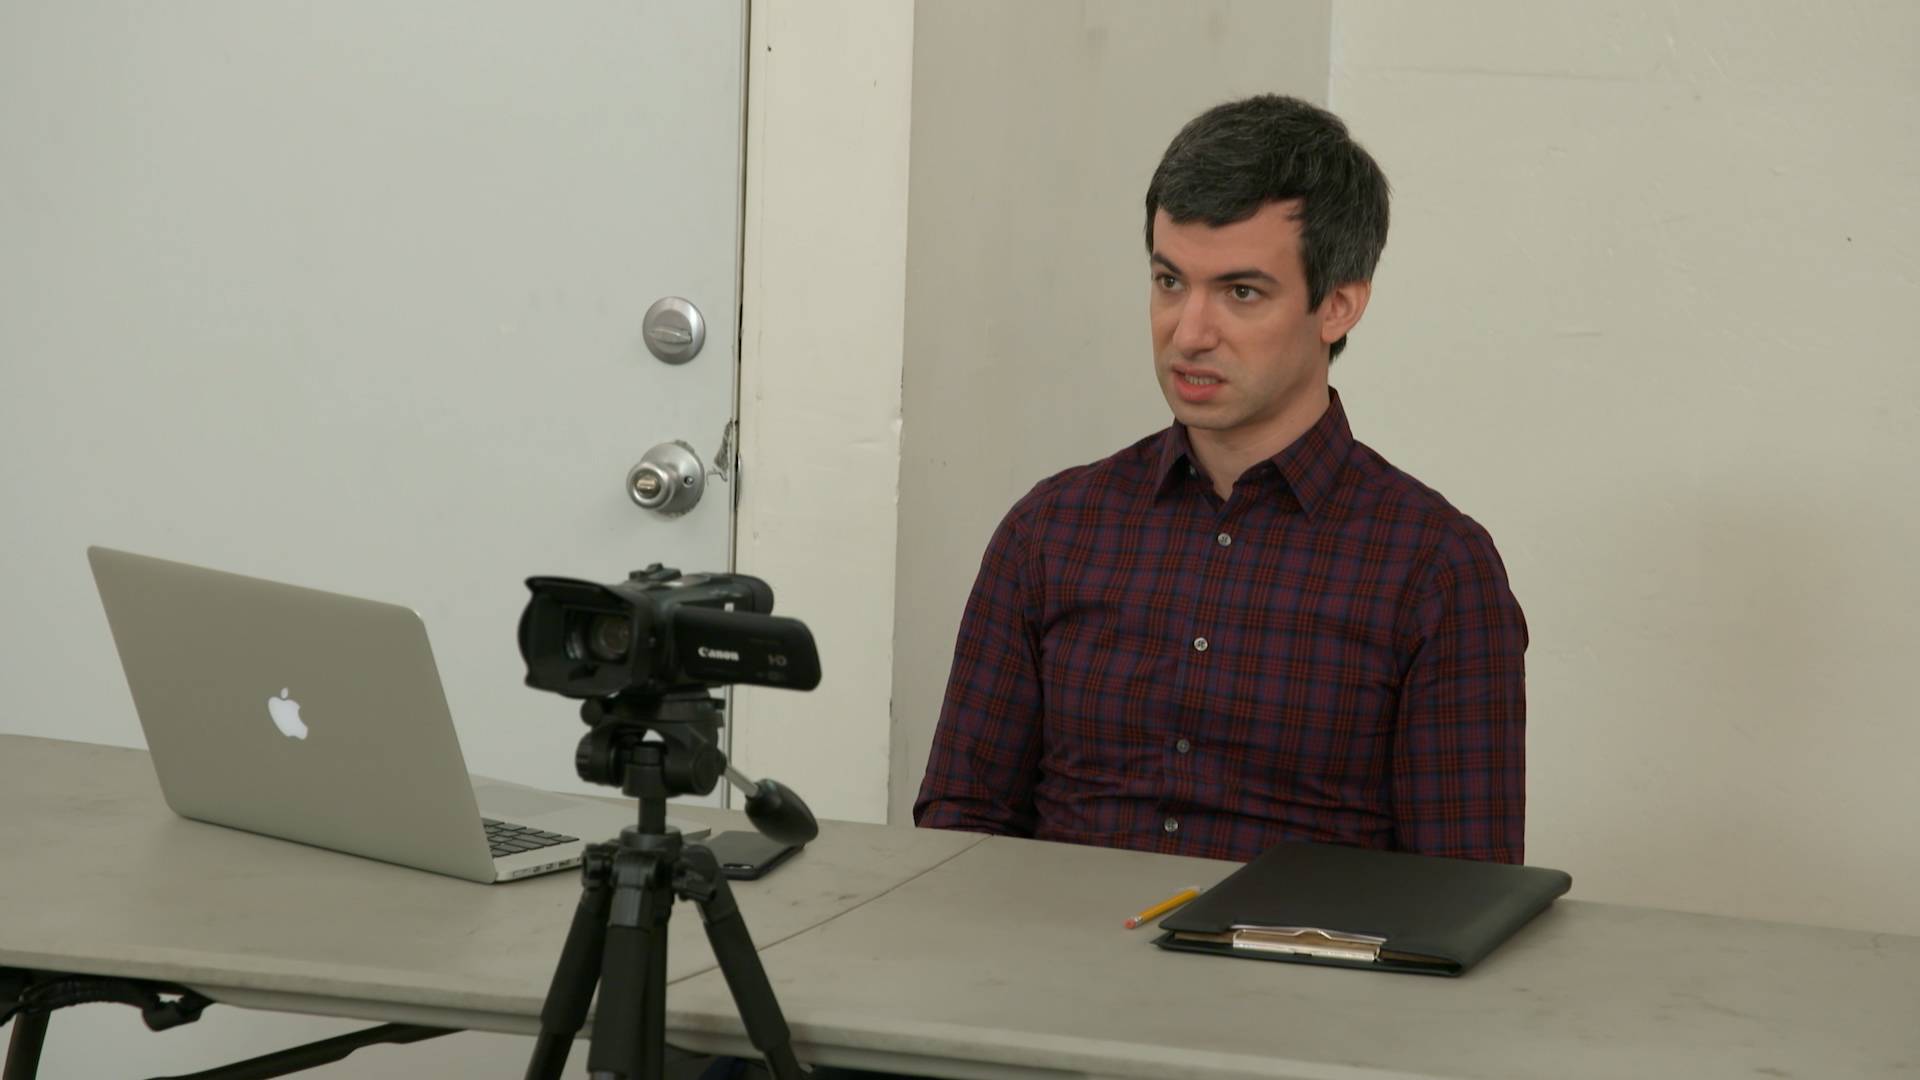 Watch Nathan for You online